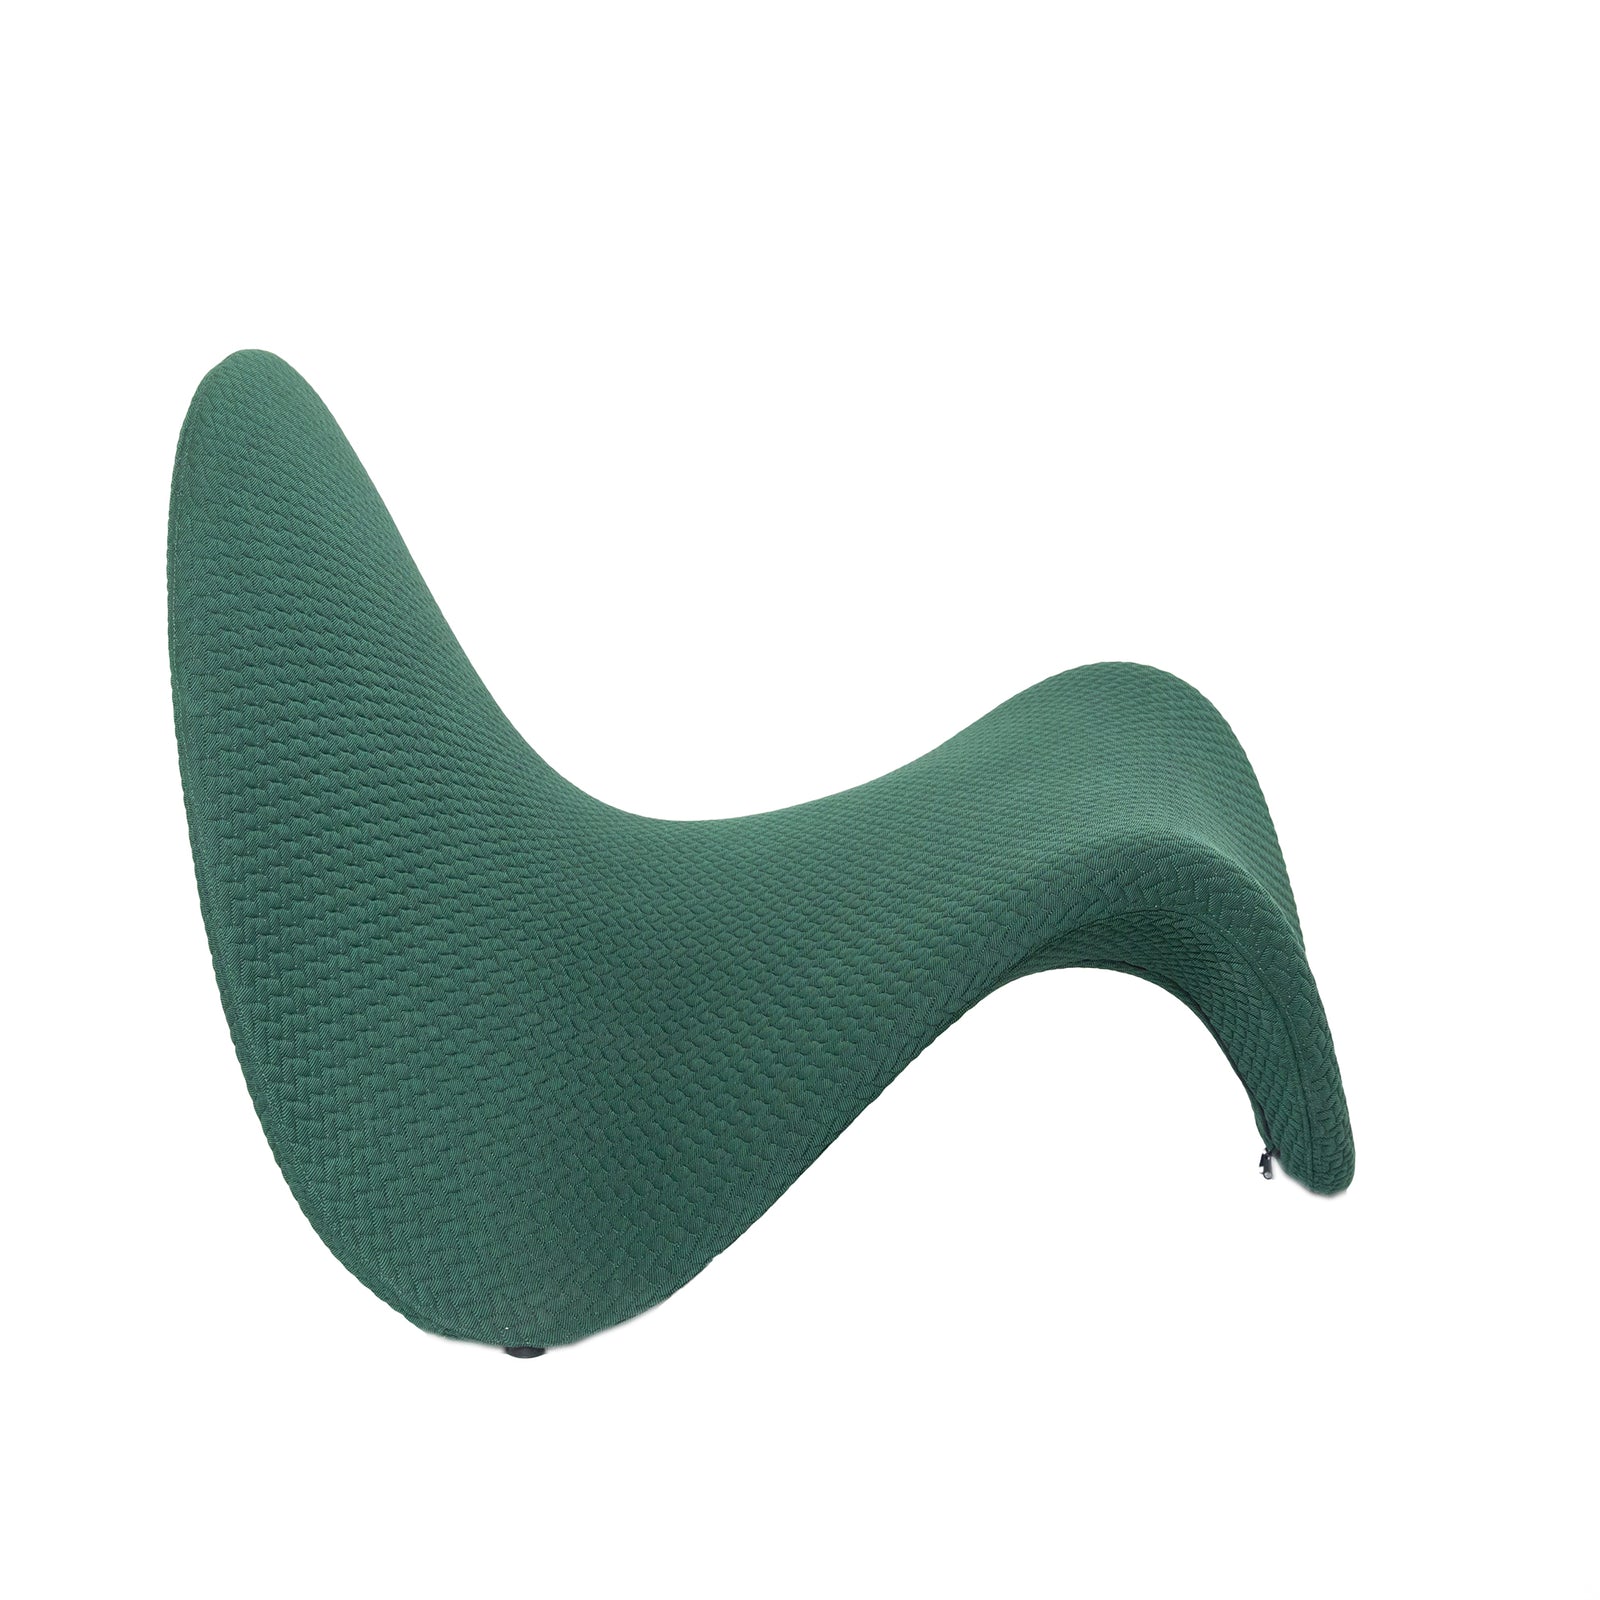 Tongue Style Chair